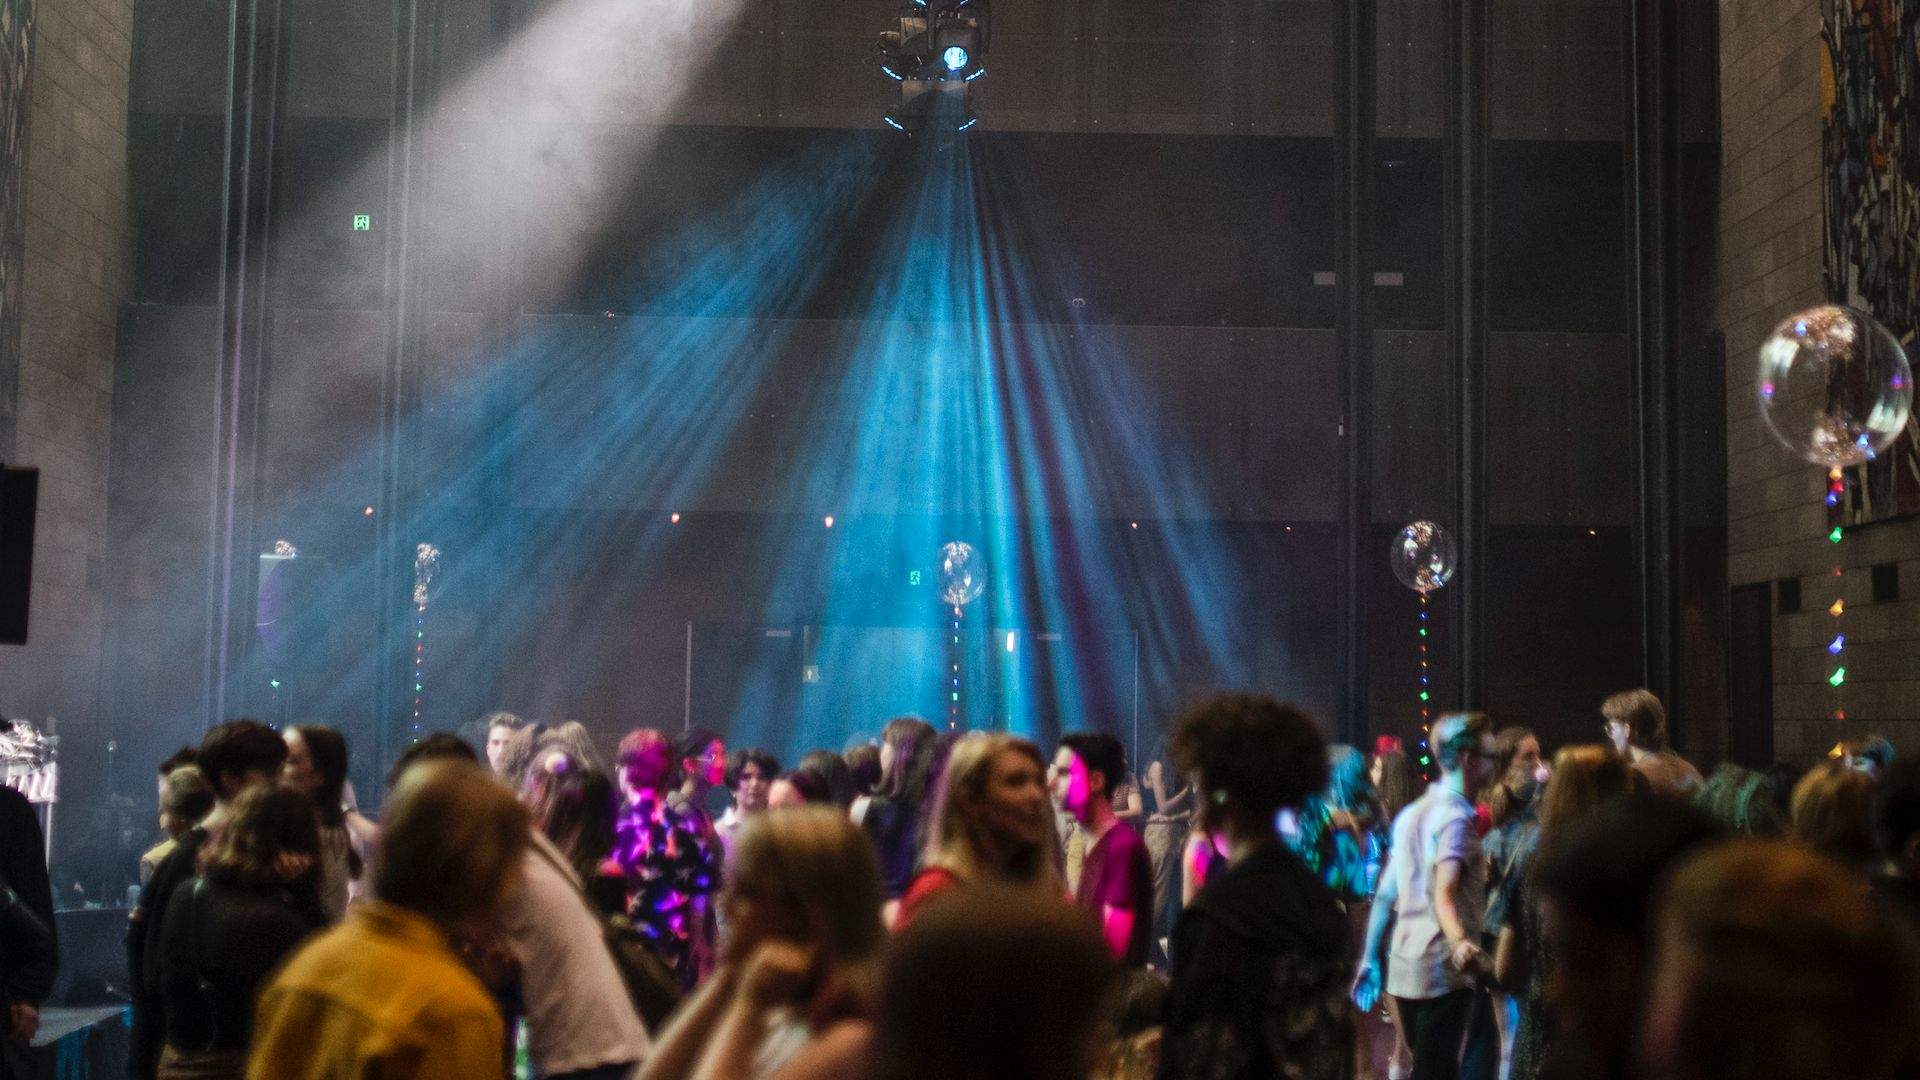 The NGV's Famed Friday Night Parties Return Next Month For a Picasso-Inspired Winter Season